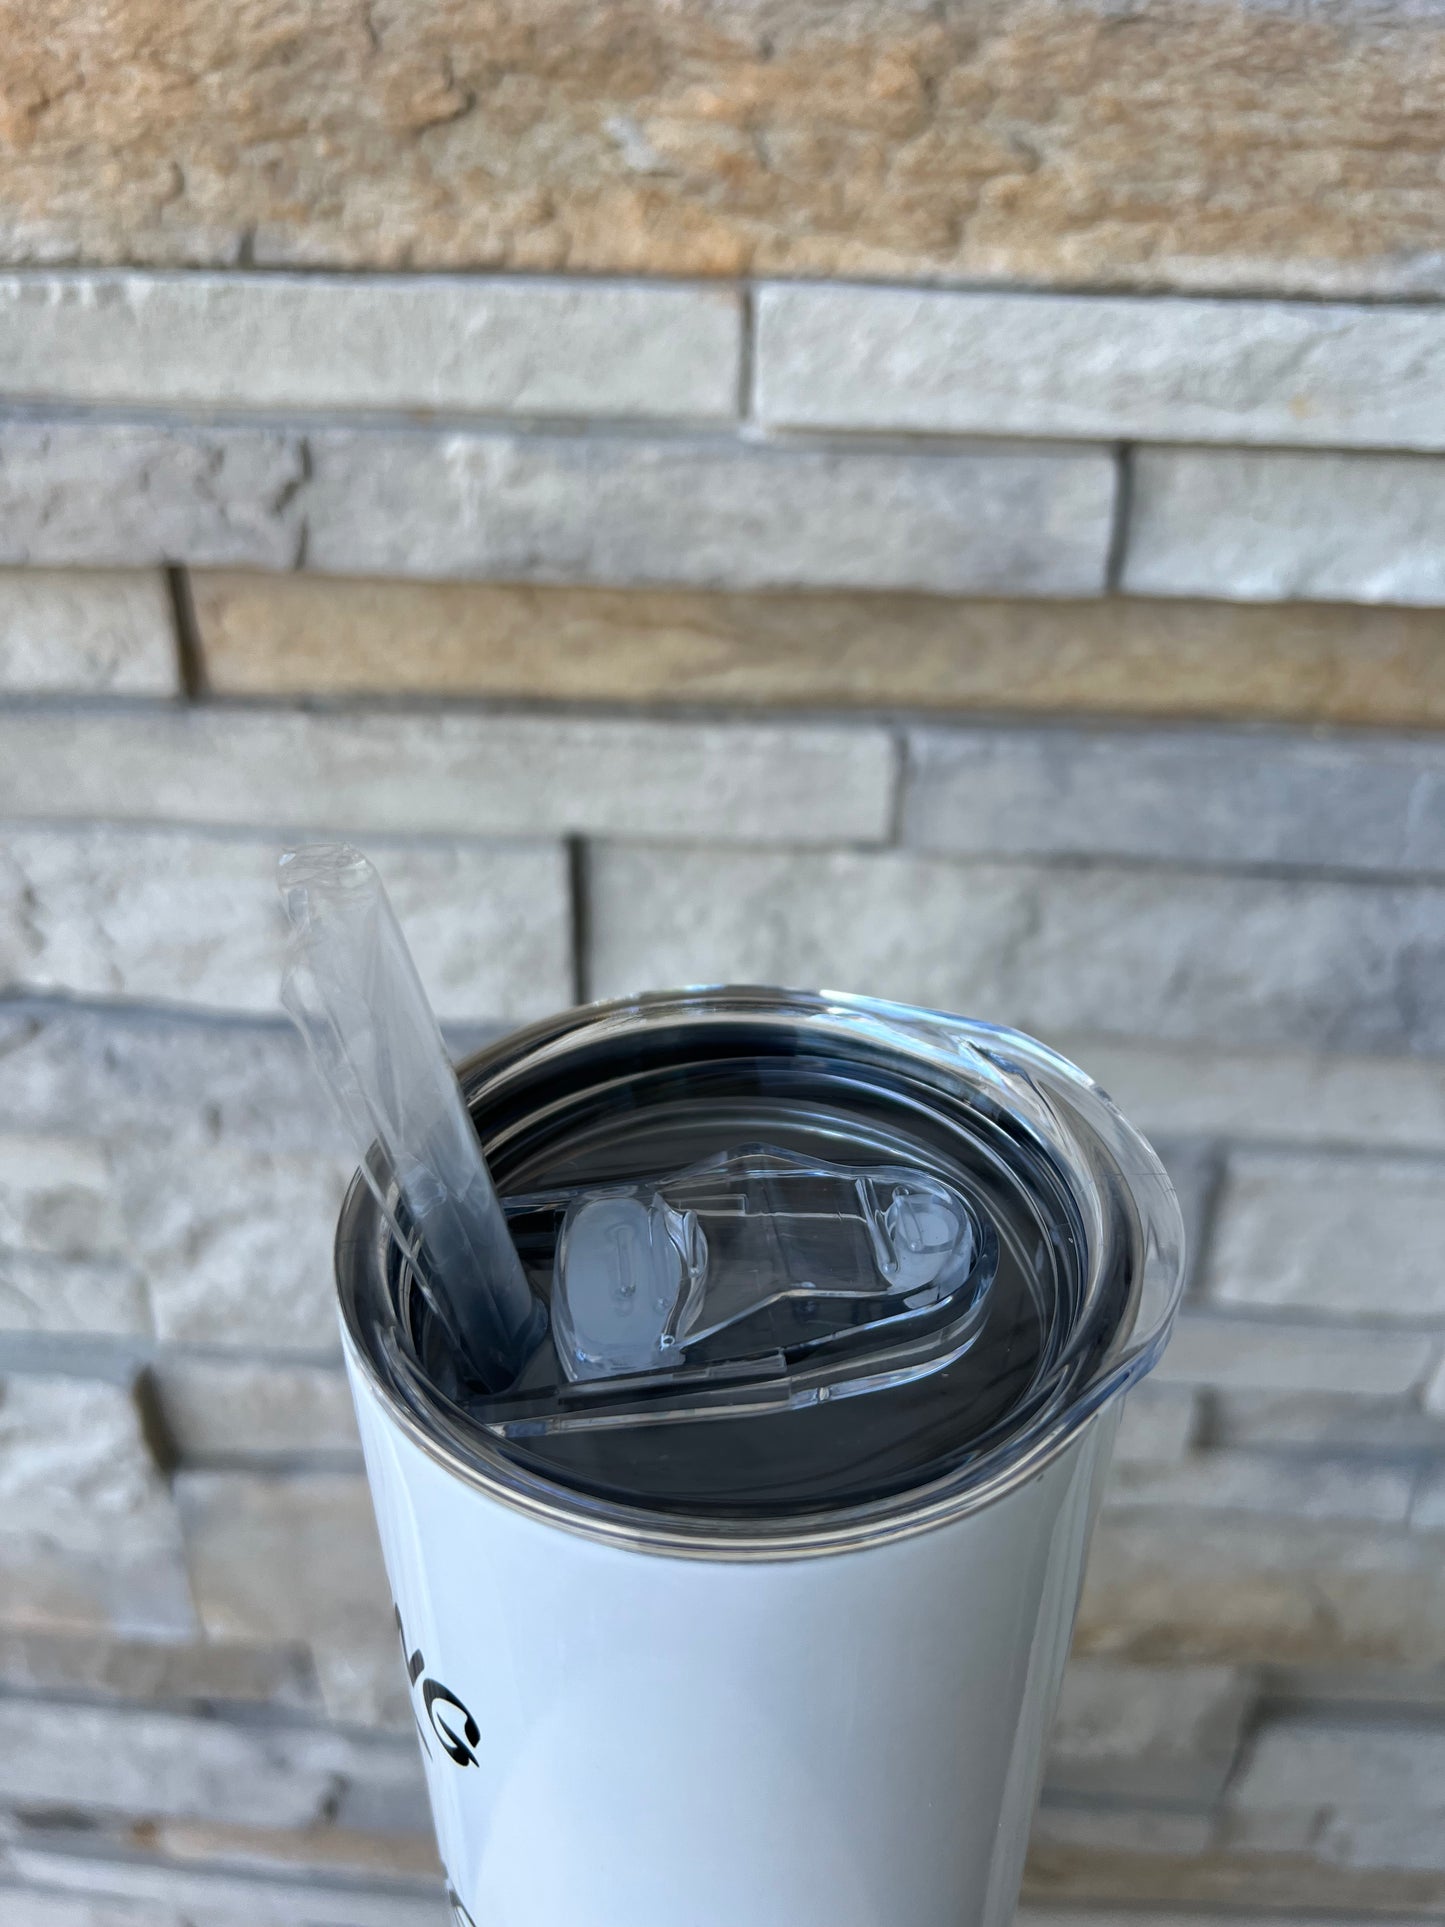 tired as a mother 15oz Tumbler